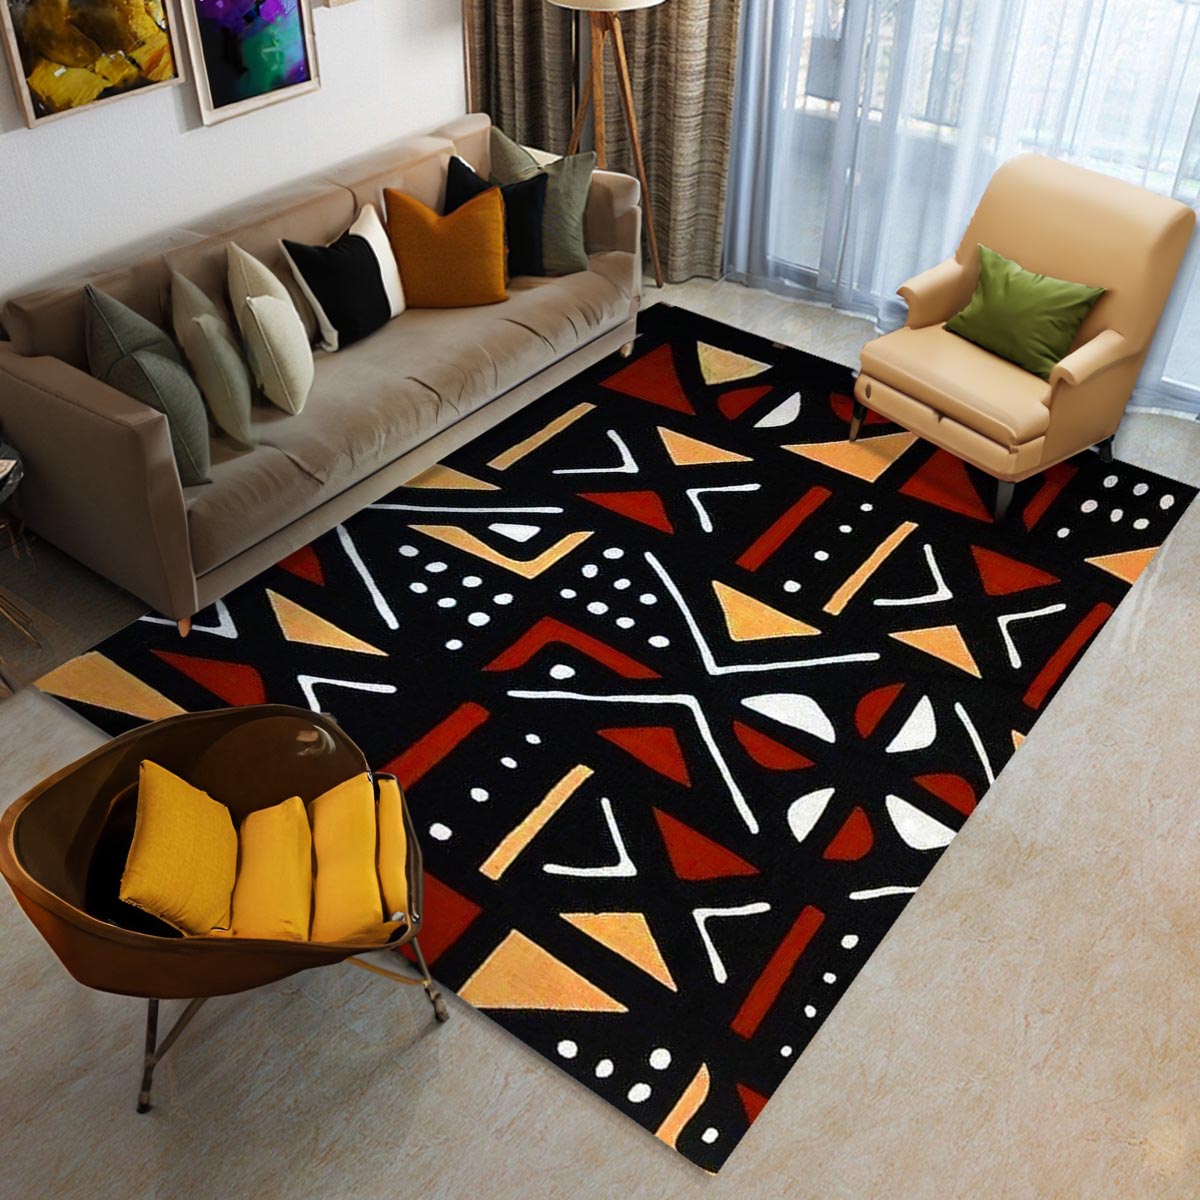 African Tribal Rug - Mudcloth Patterned Carpet Style